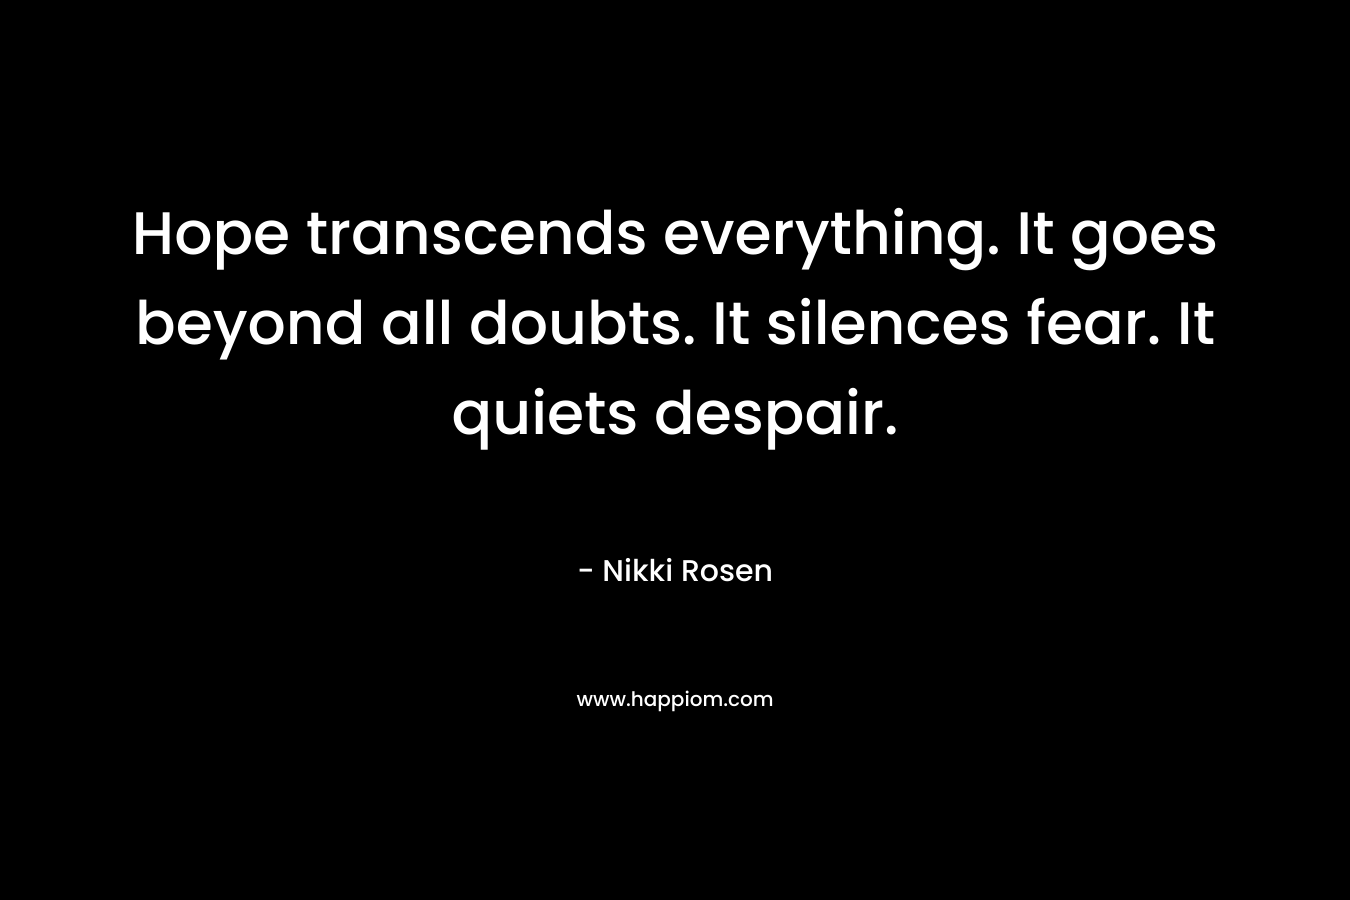 Hope transcends everything. It goes beyond all doubts. It silences fear. It quiets despair. – Nikki Rosen